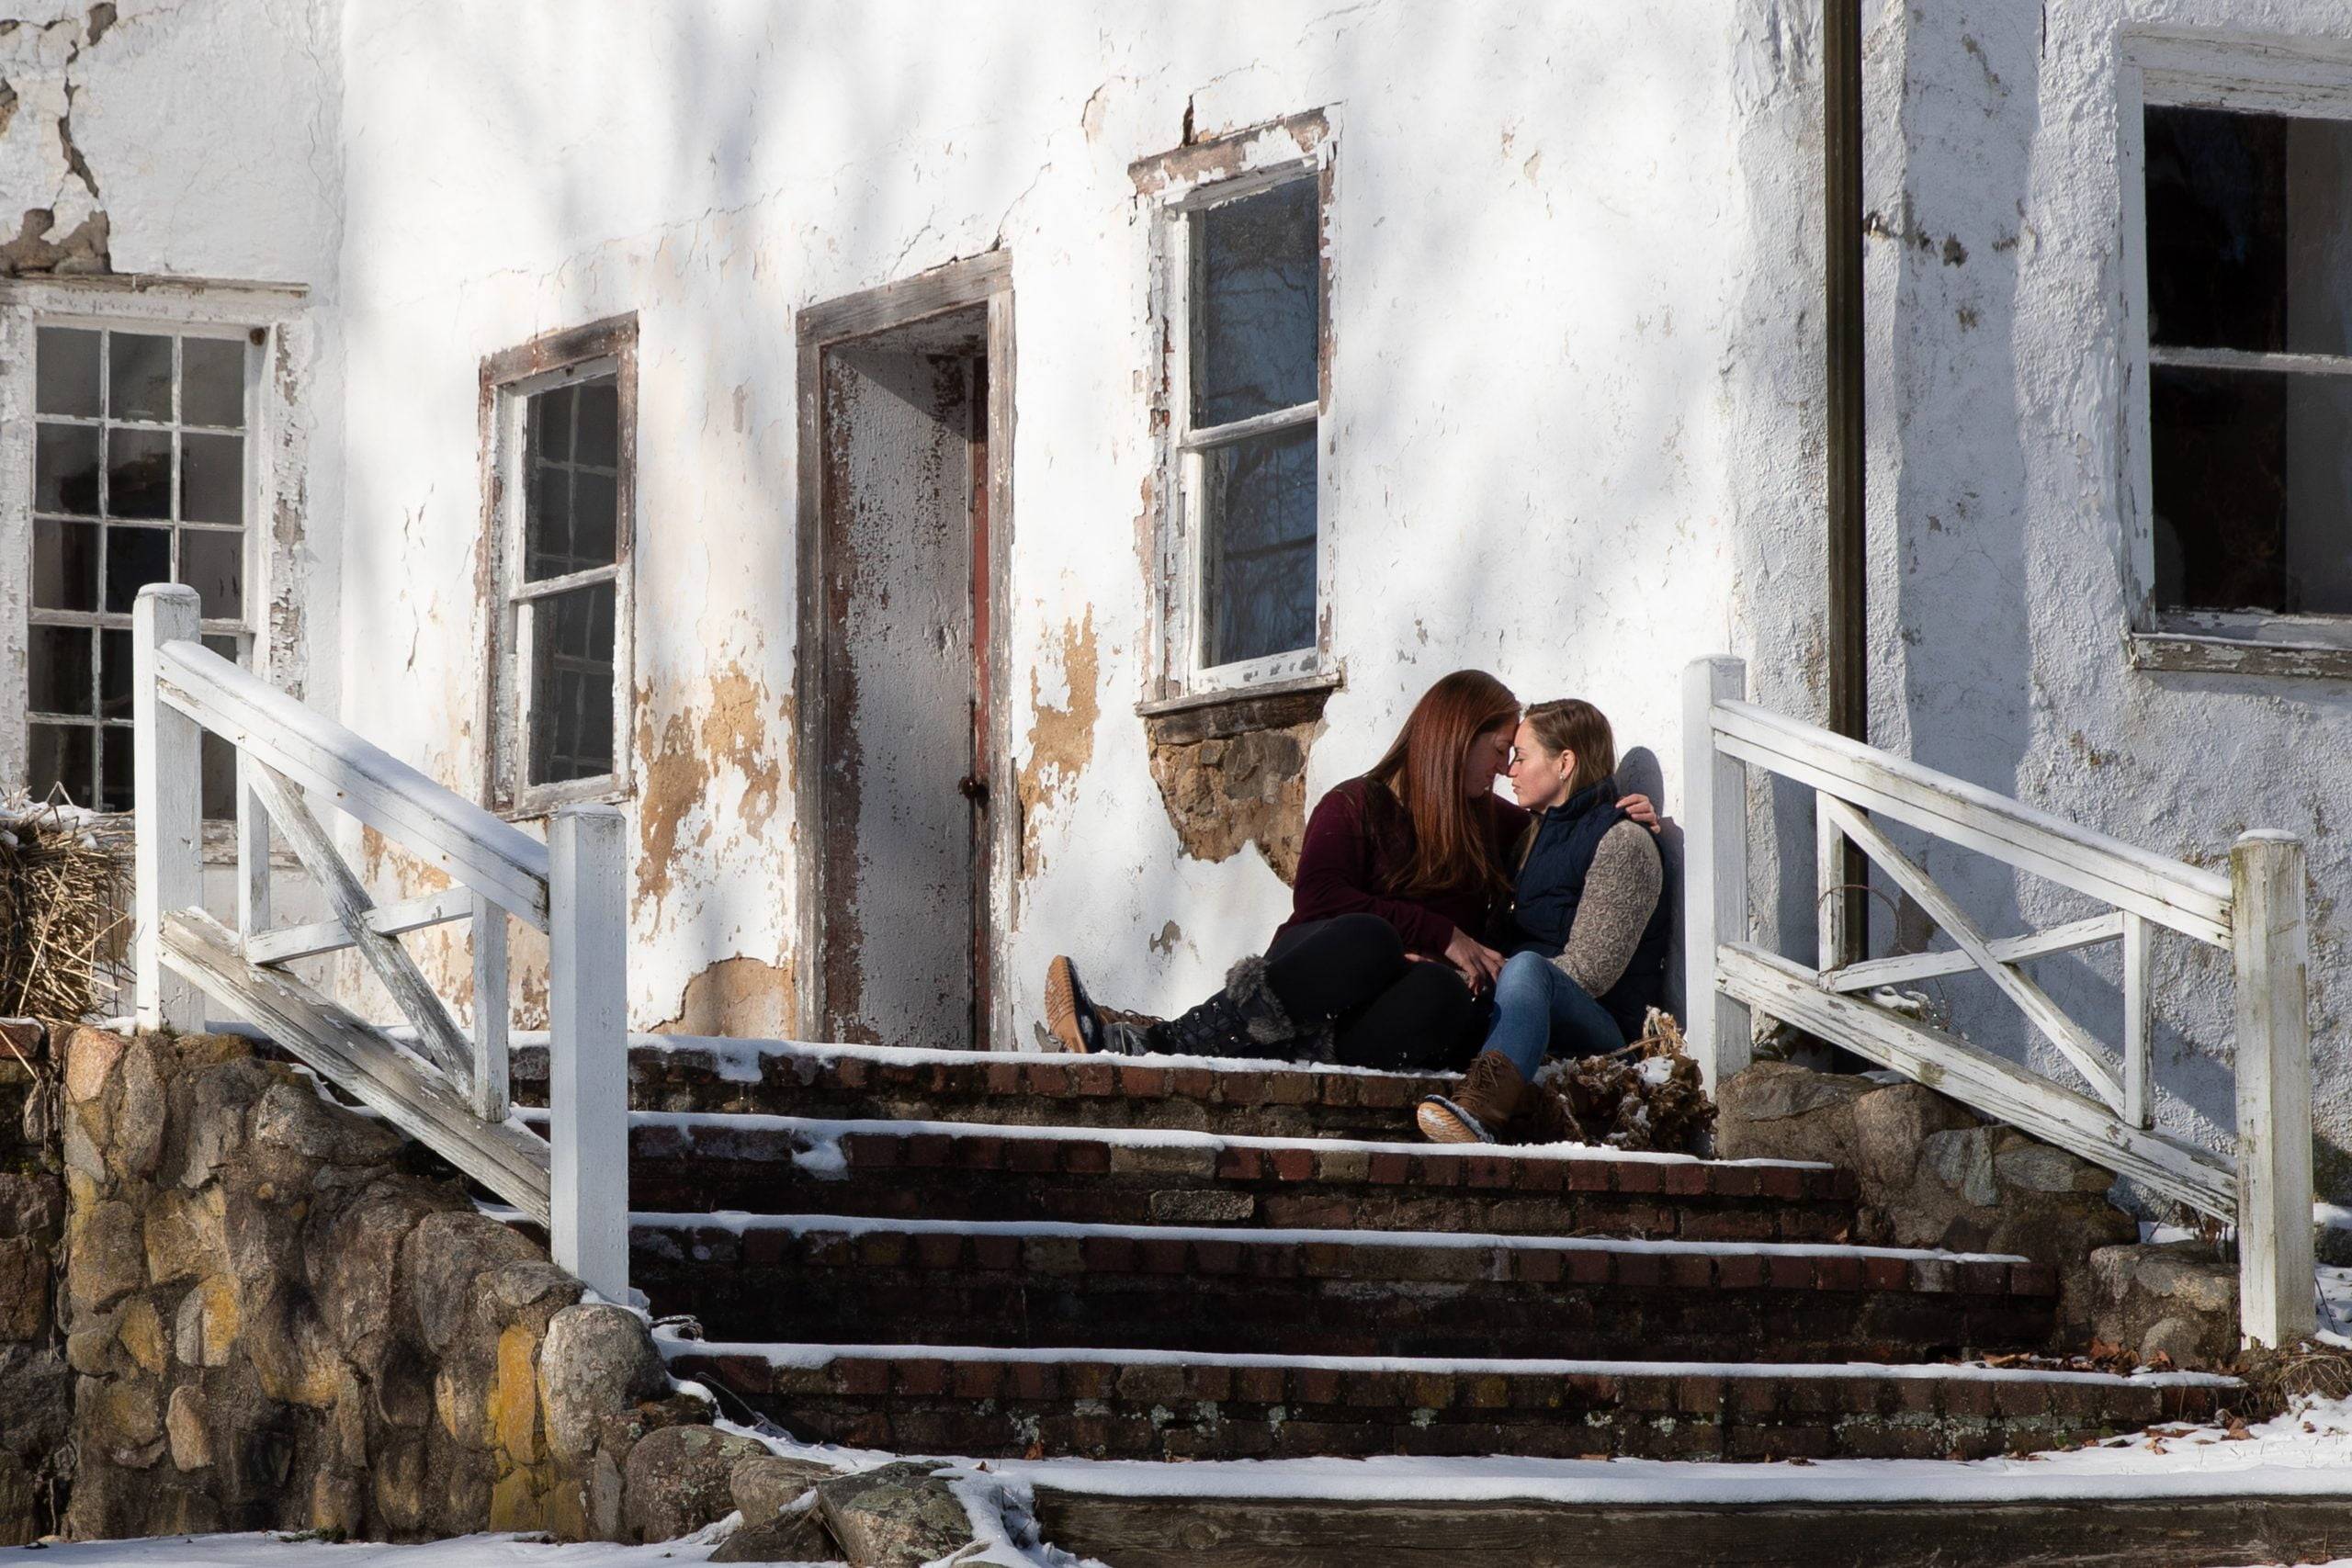 A couple sits on the steps of a building in the snow.